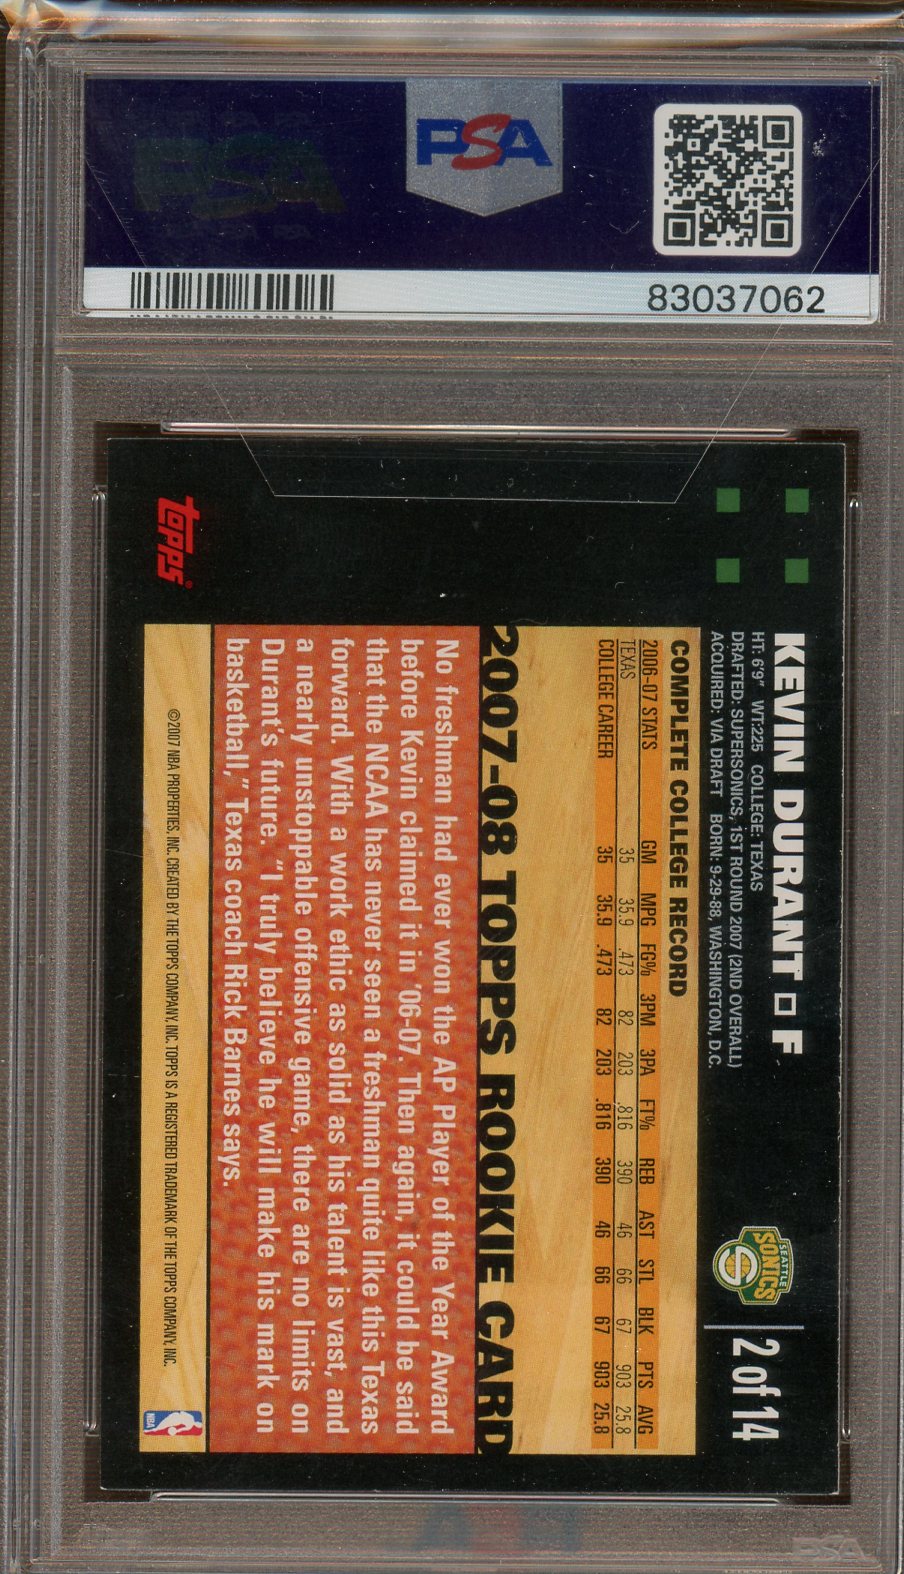 PSA - NM-MT 8 - 2007 - Topps - Rookie Card - Kevin Durant